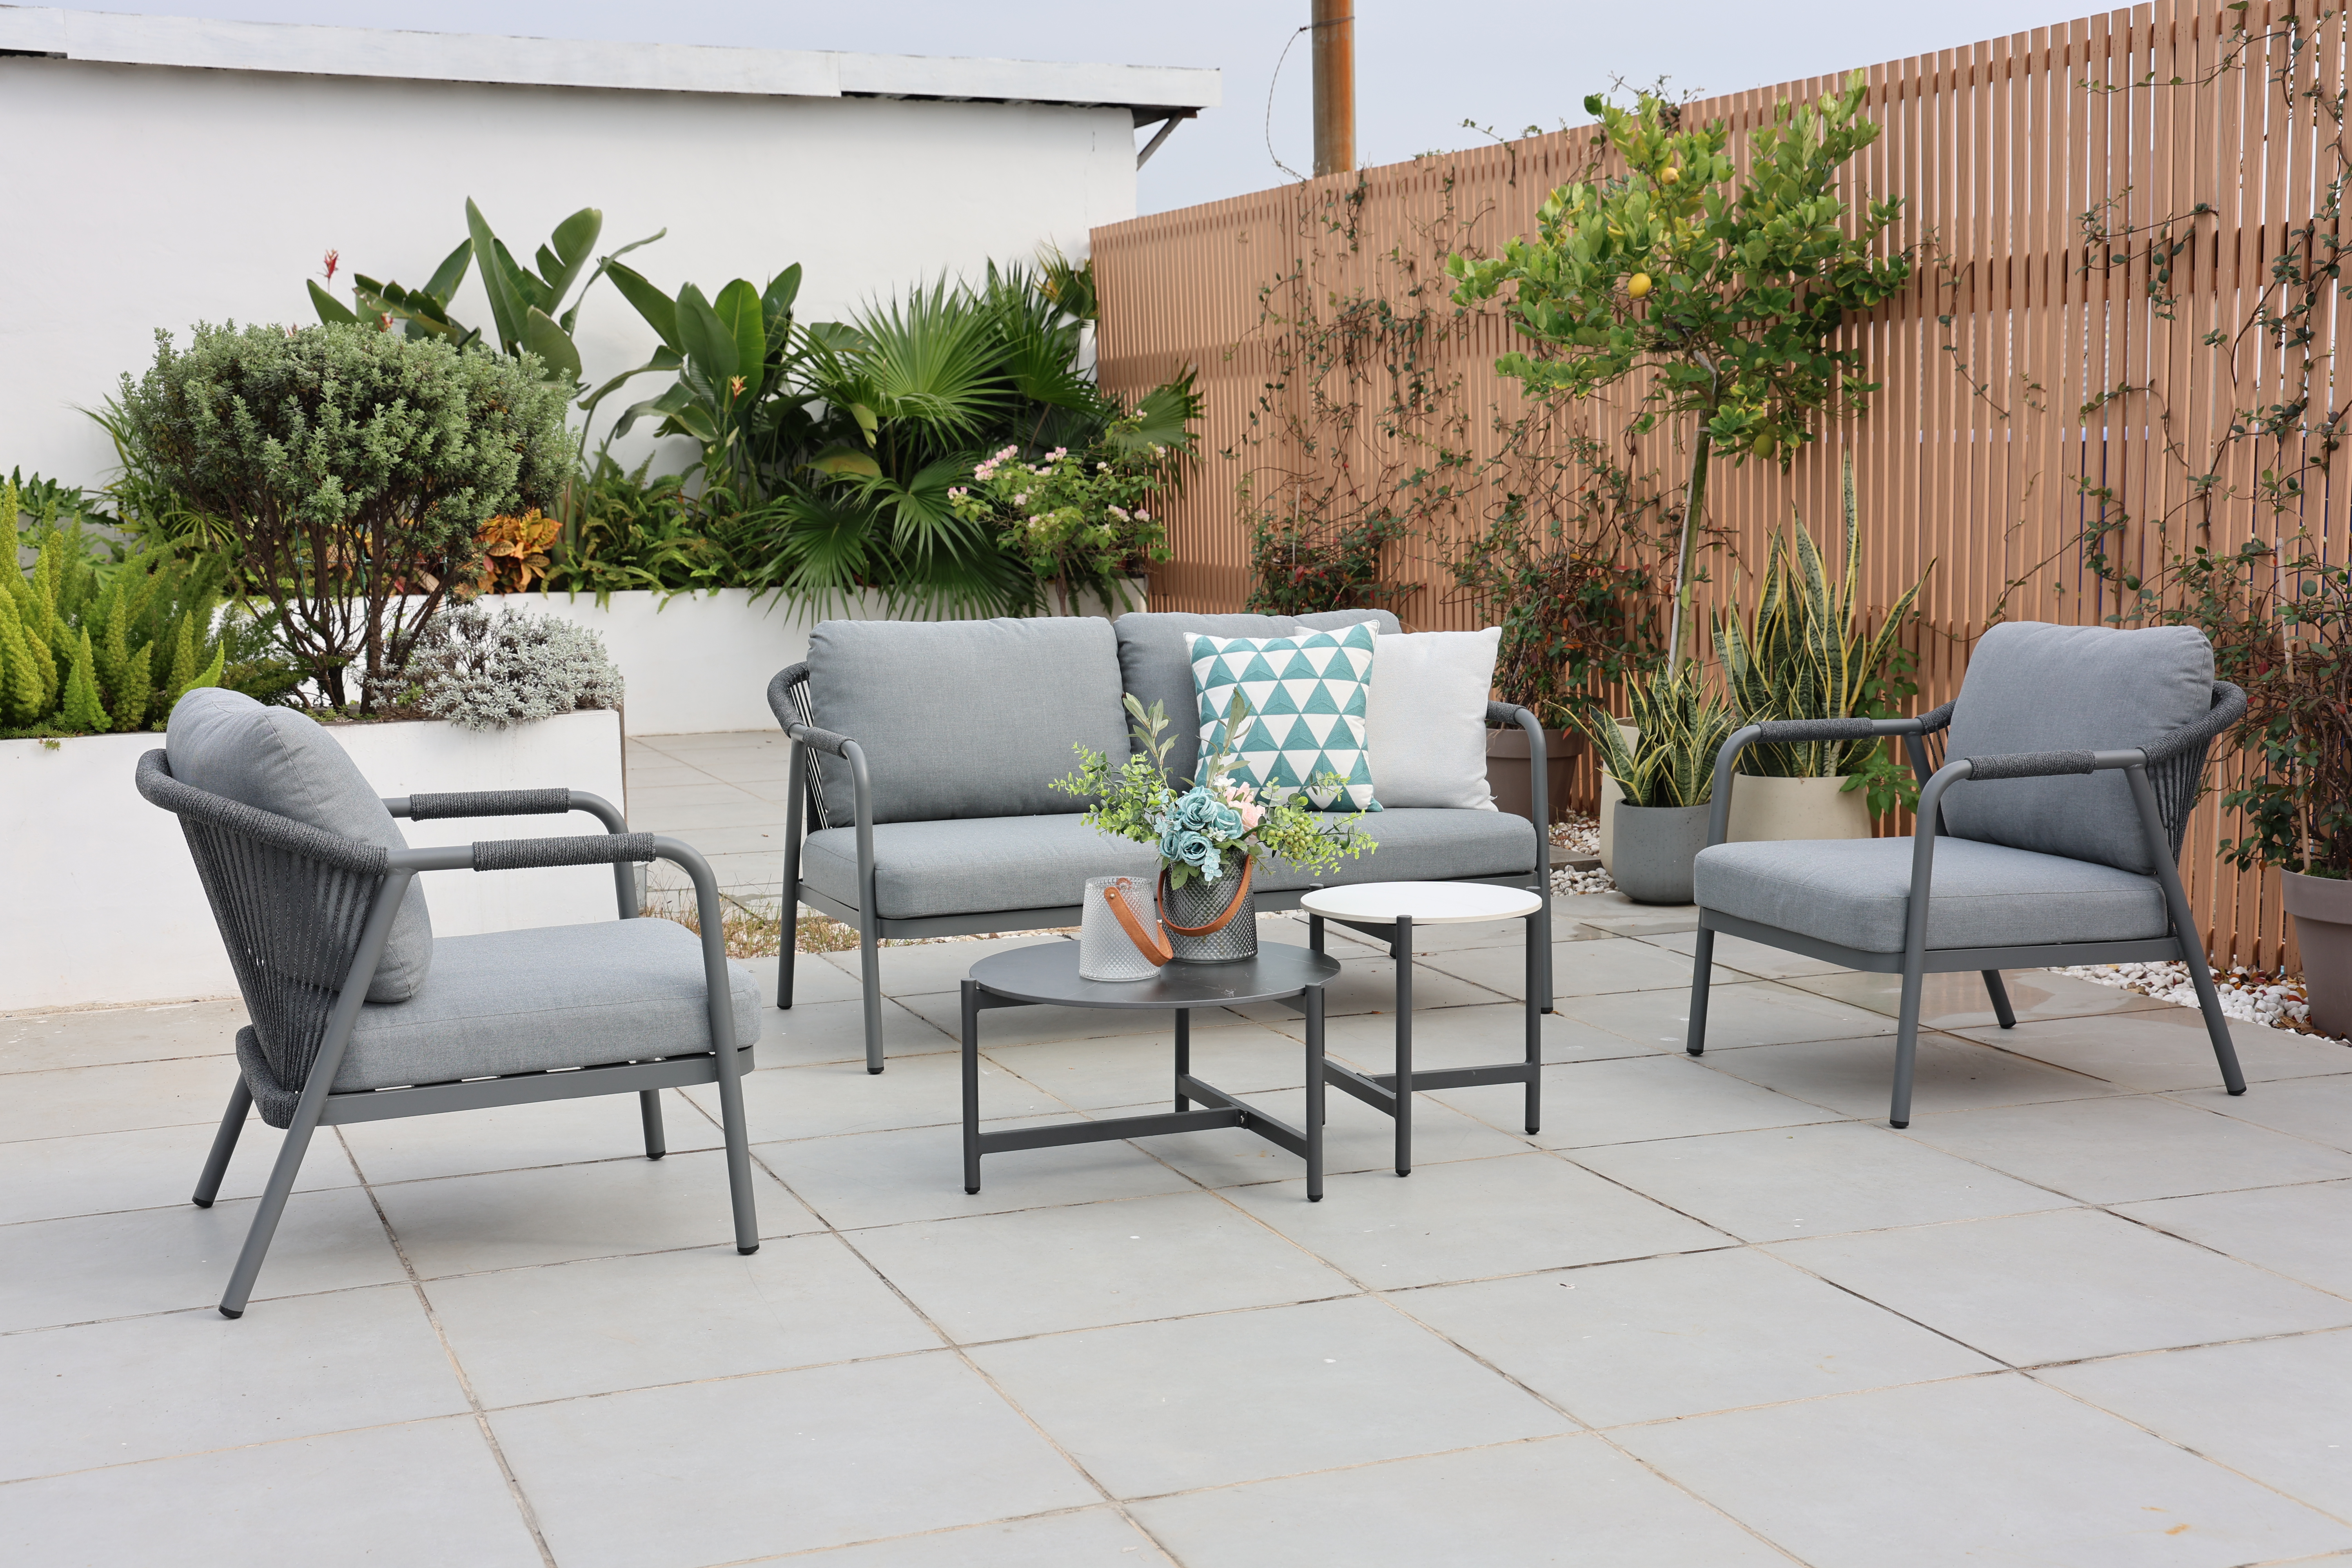 MAINTENANCE INSTRUCTION FOR OUTDOOR FURNITURE